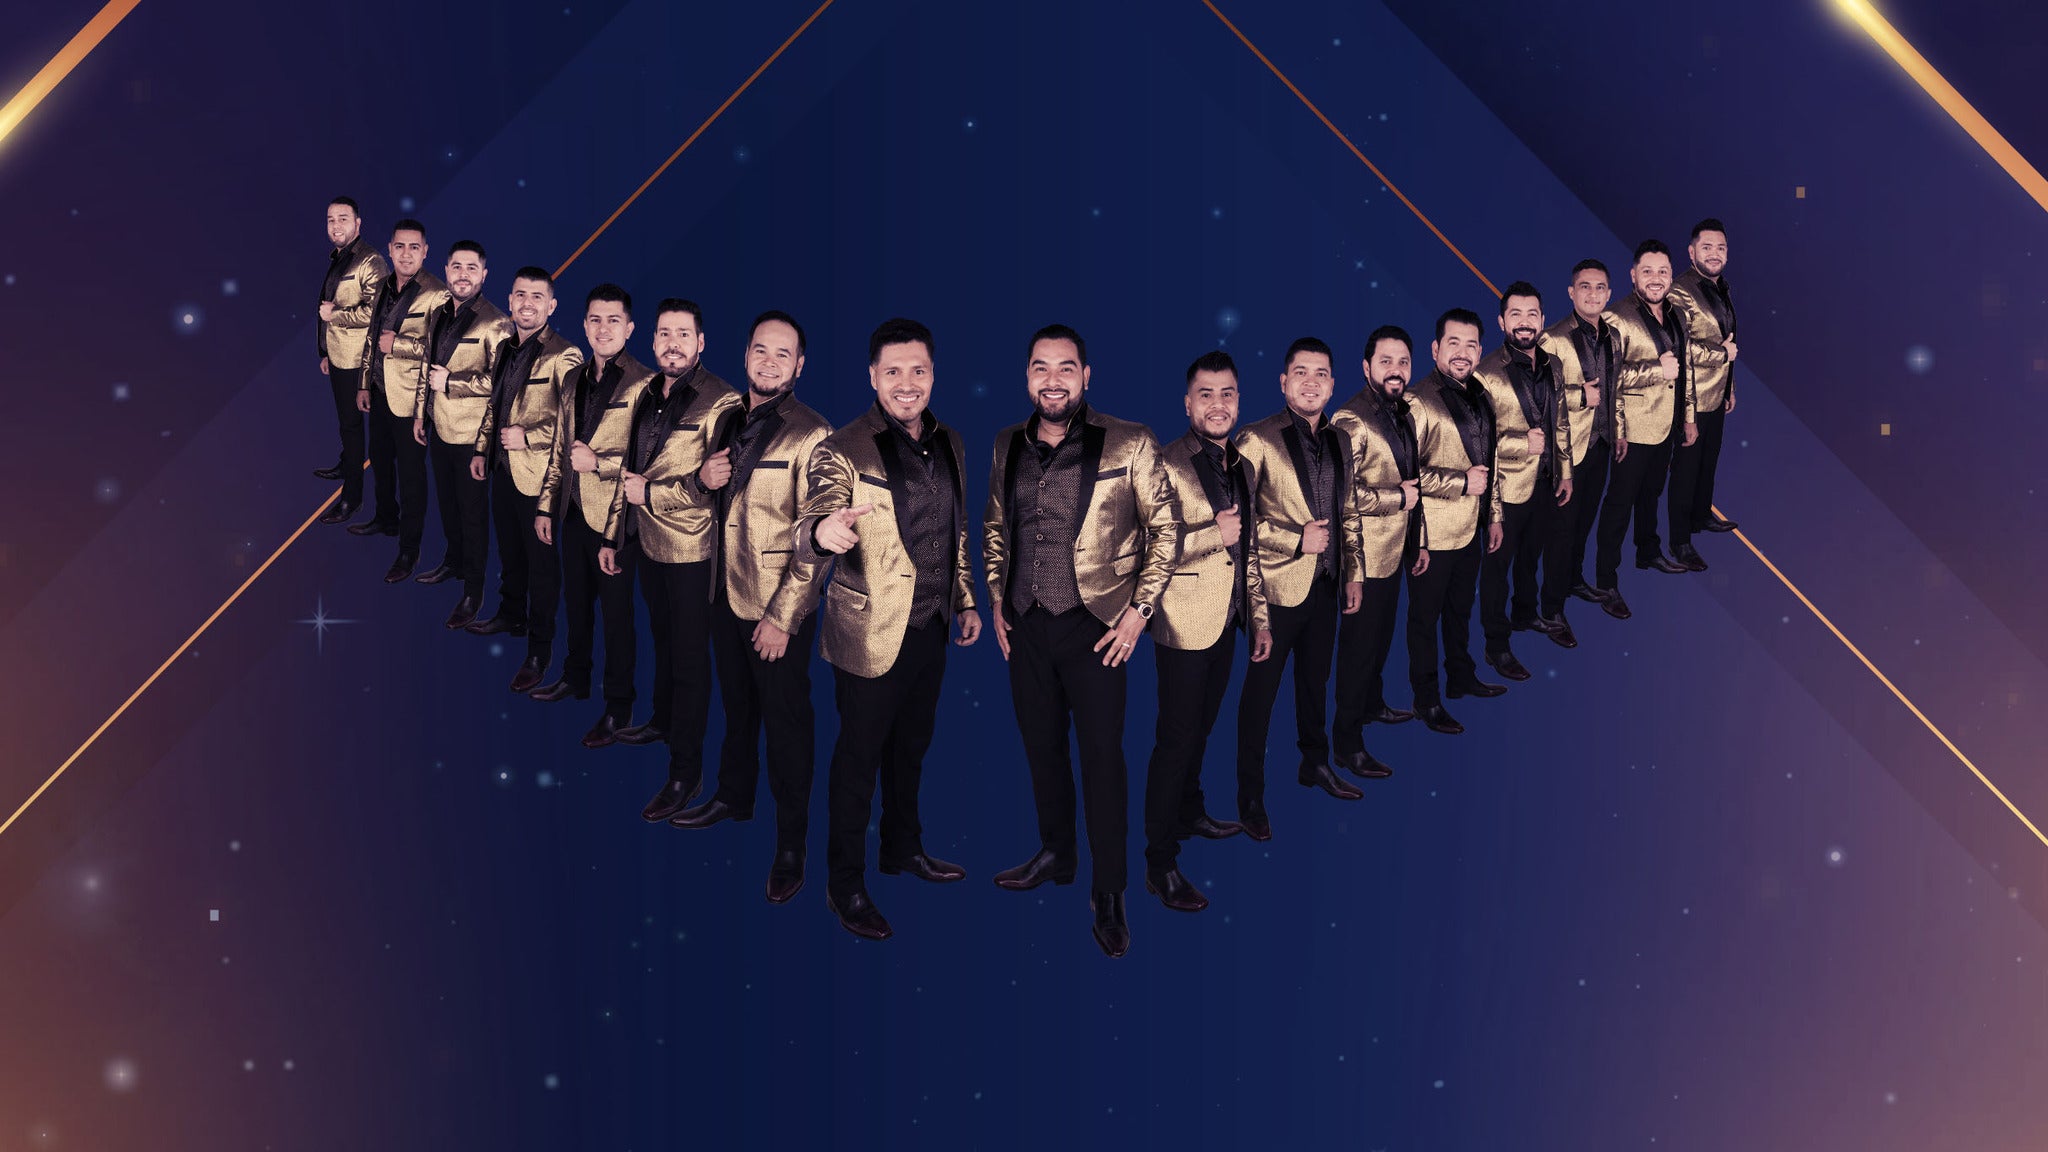 Banda MS - MS20 Tour presale password for show tickets in New York, NY (Madison Square Garden)